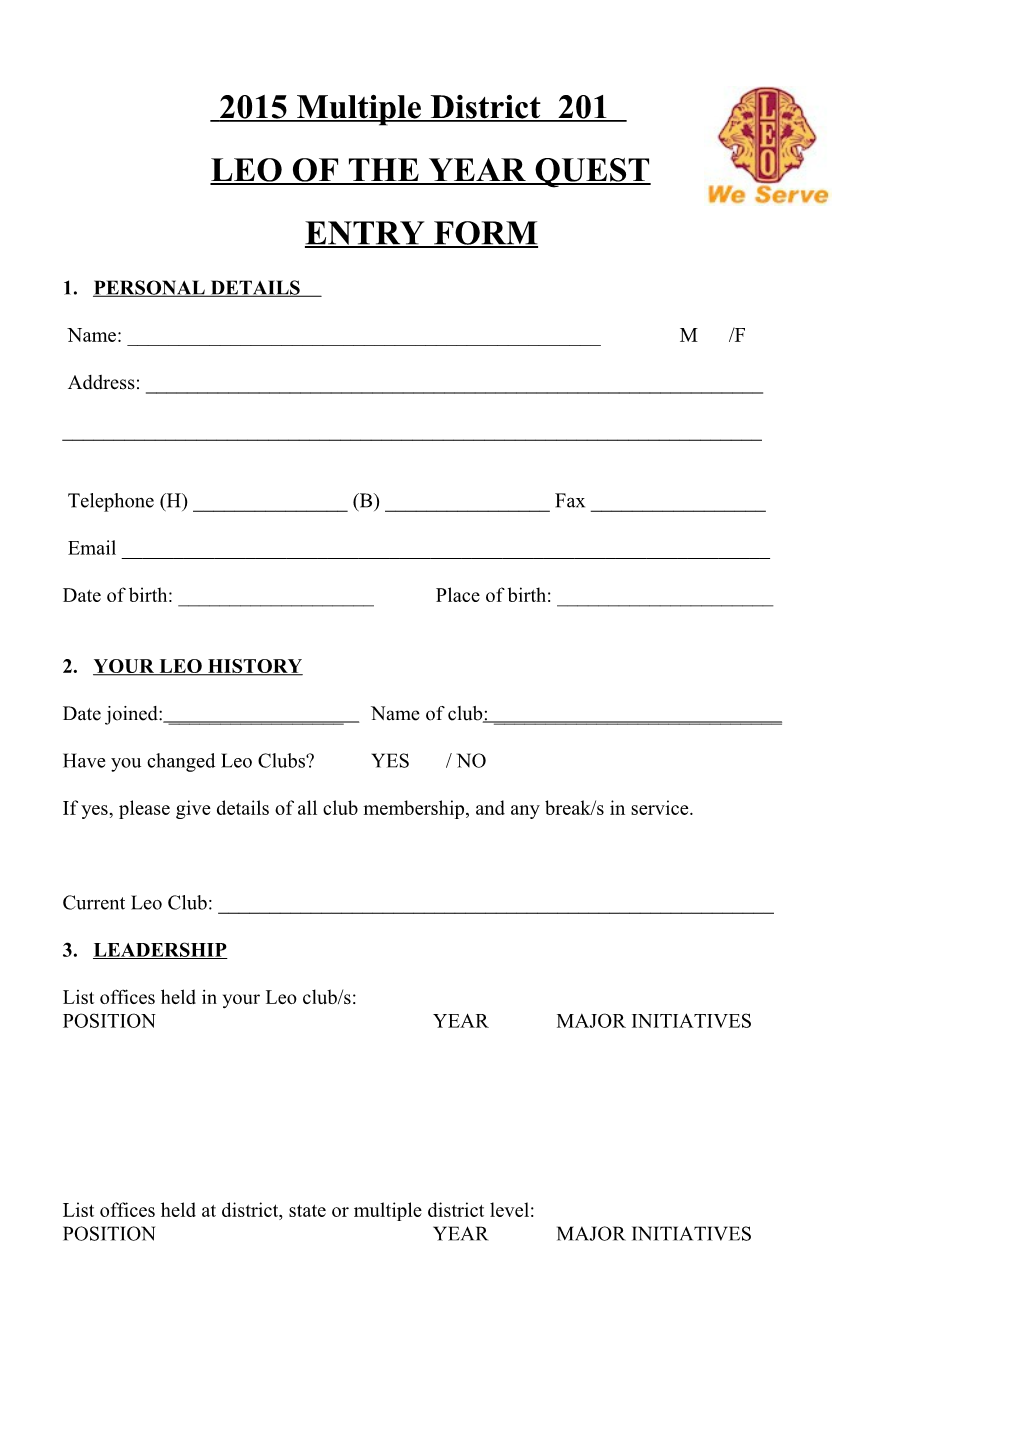 Leo of the Year Entry Form